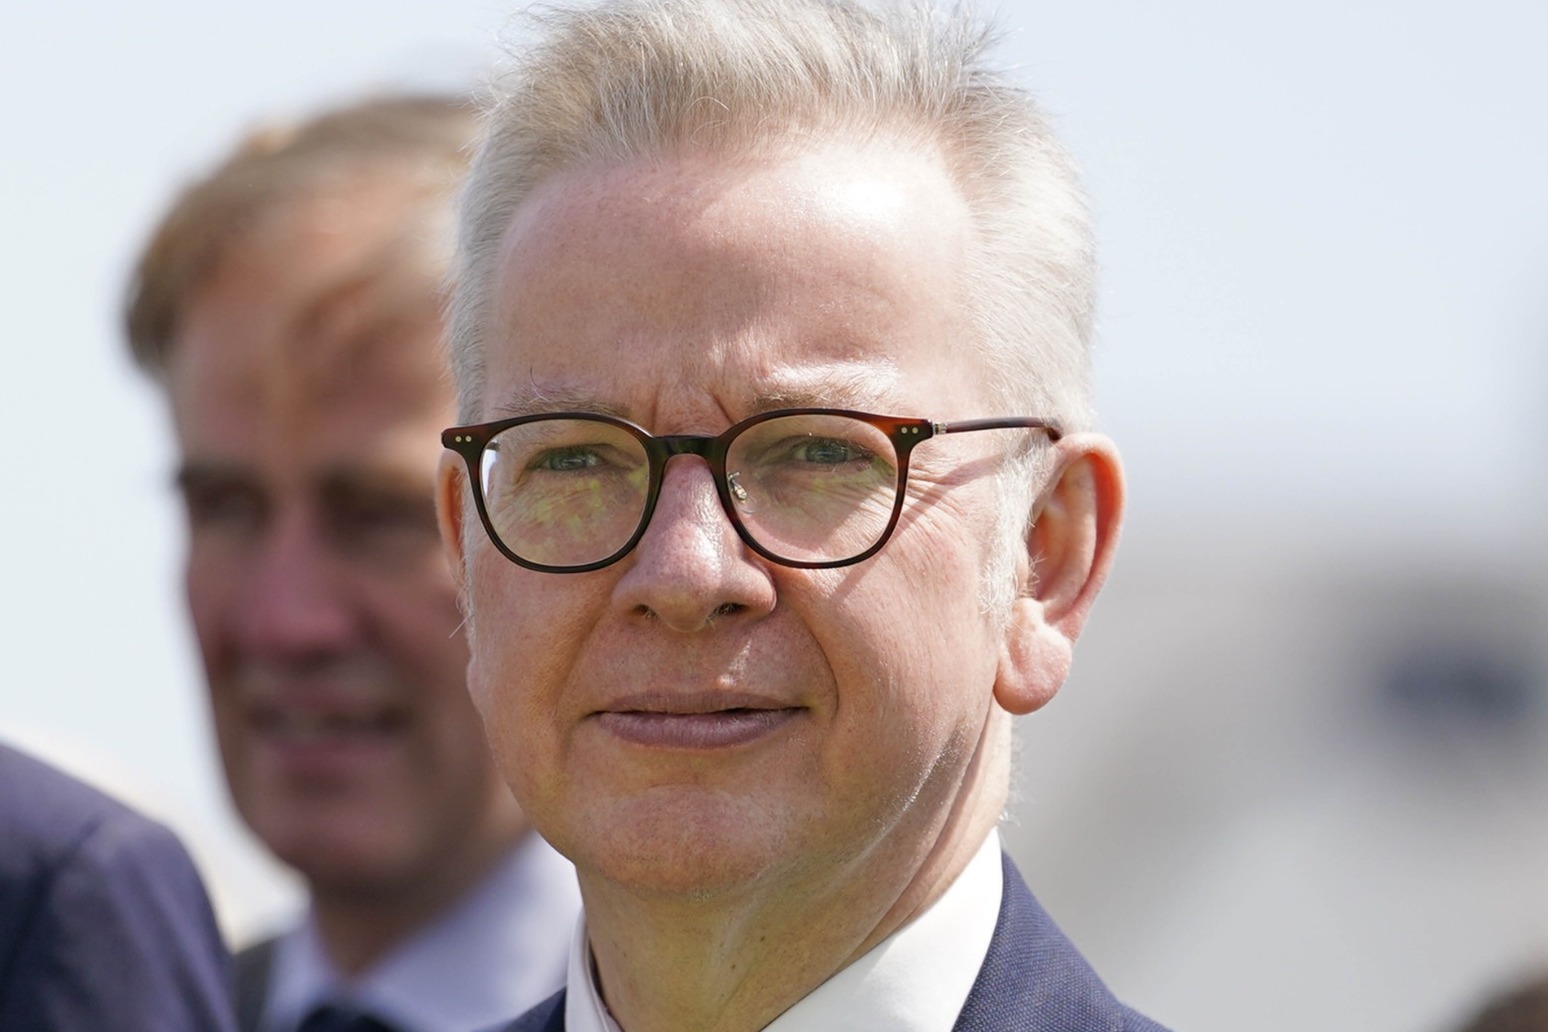 No emergency budget planned to ease cost-of-living crisis, says Gove 